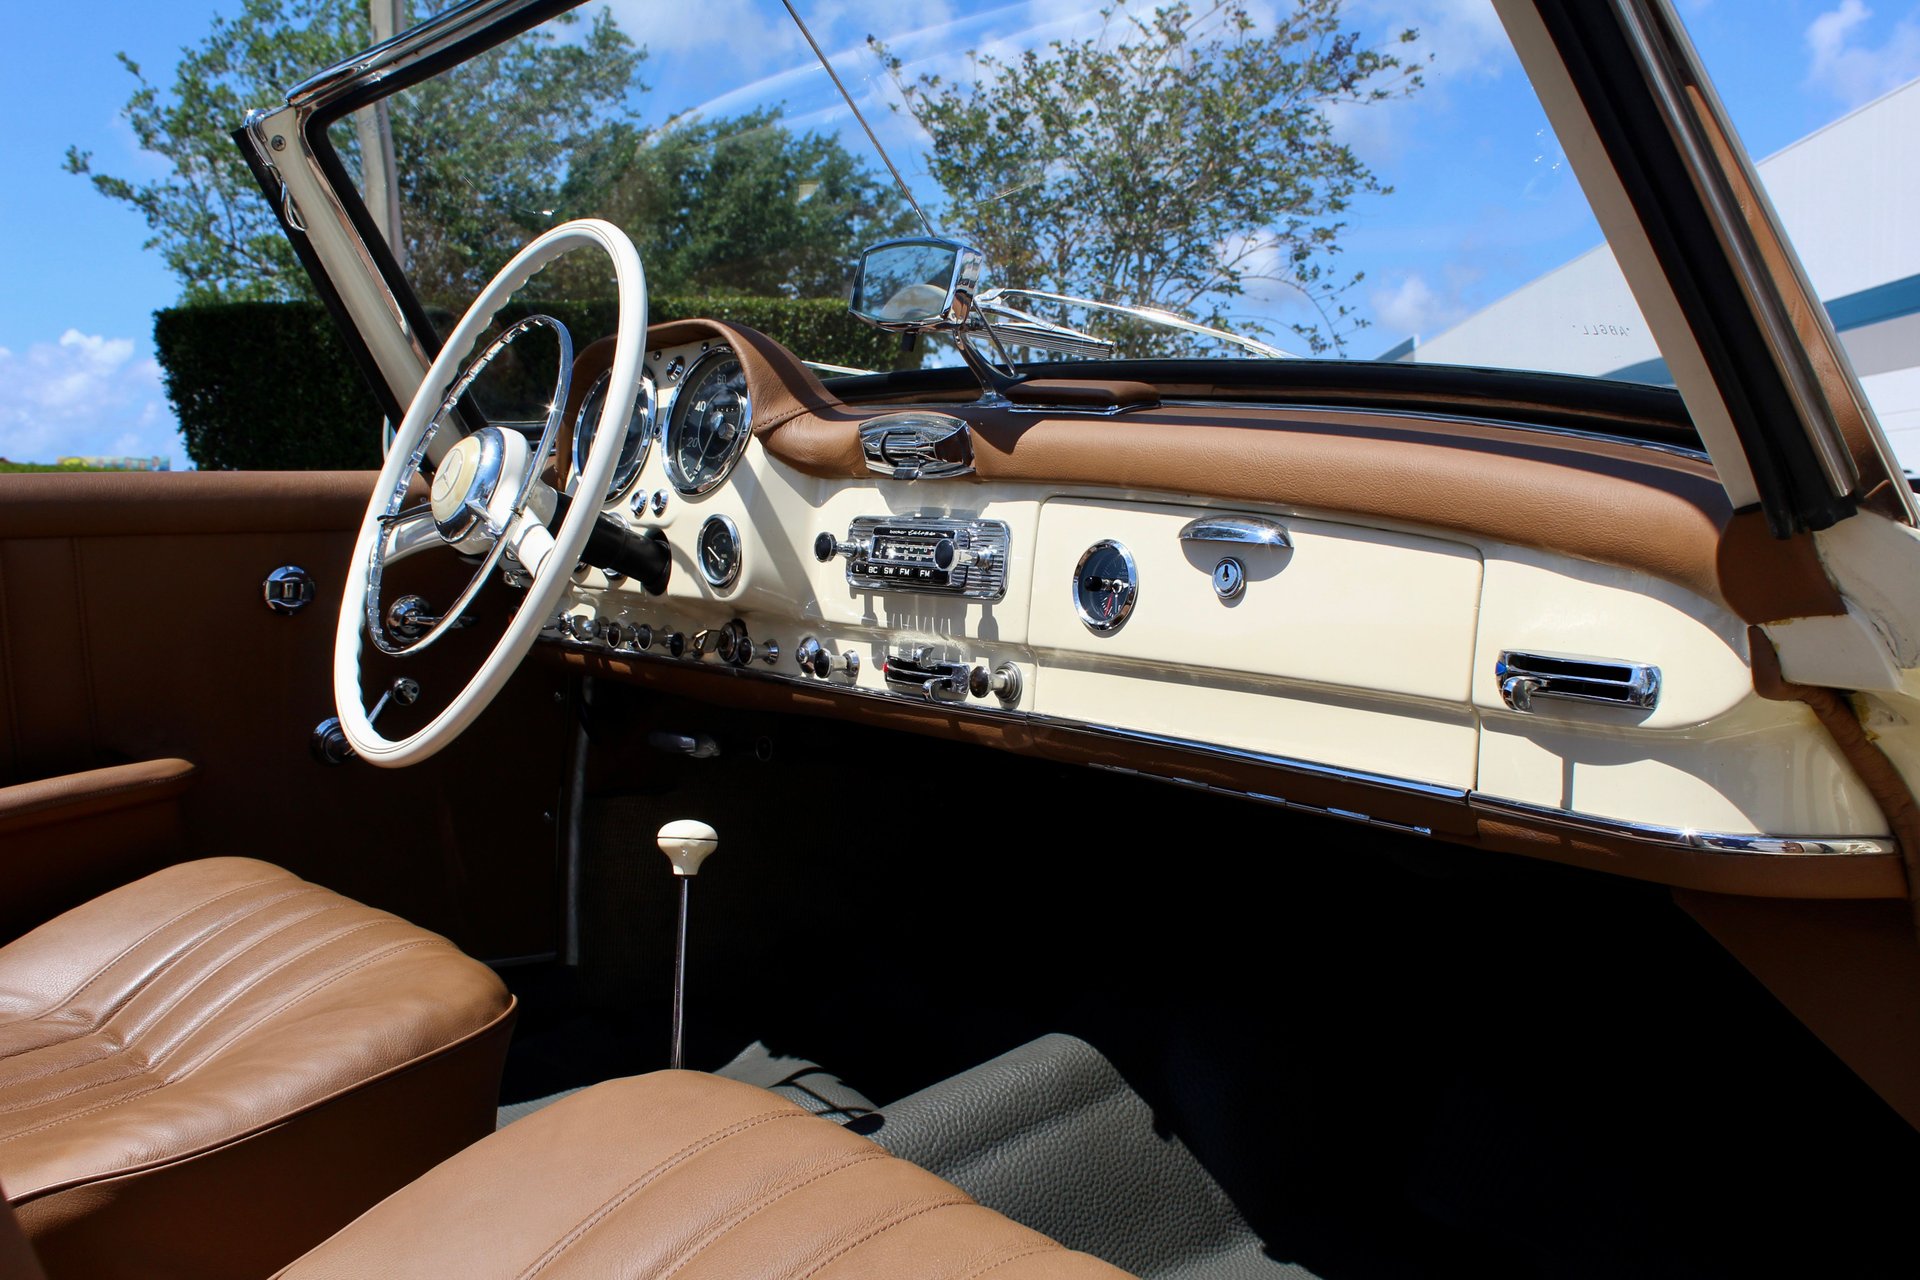 For Sale 1962 Mercedes 190 SL